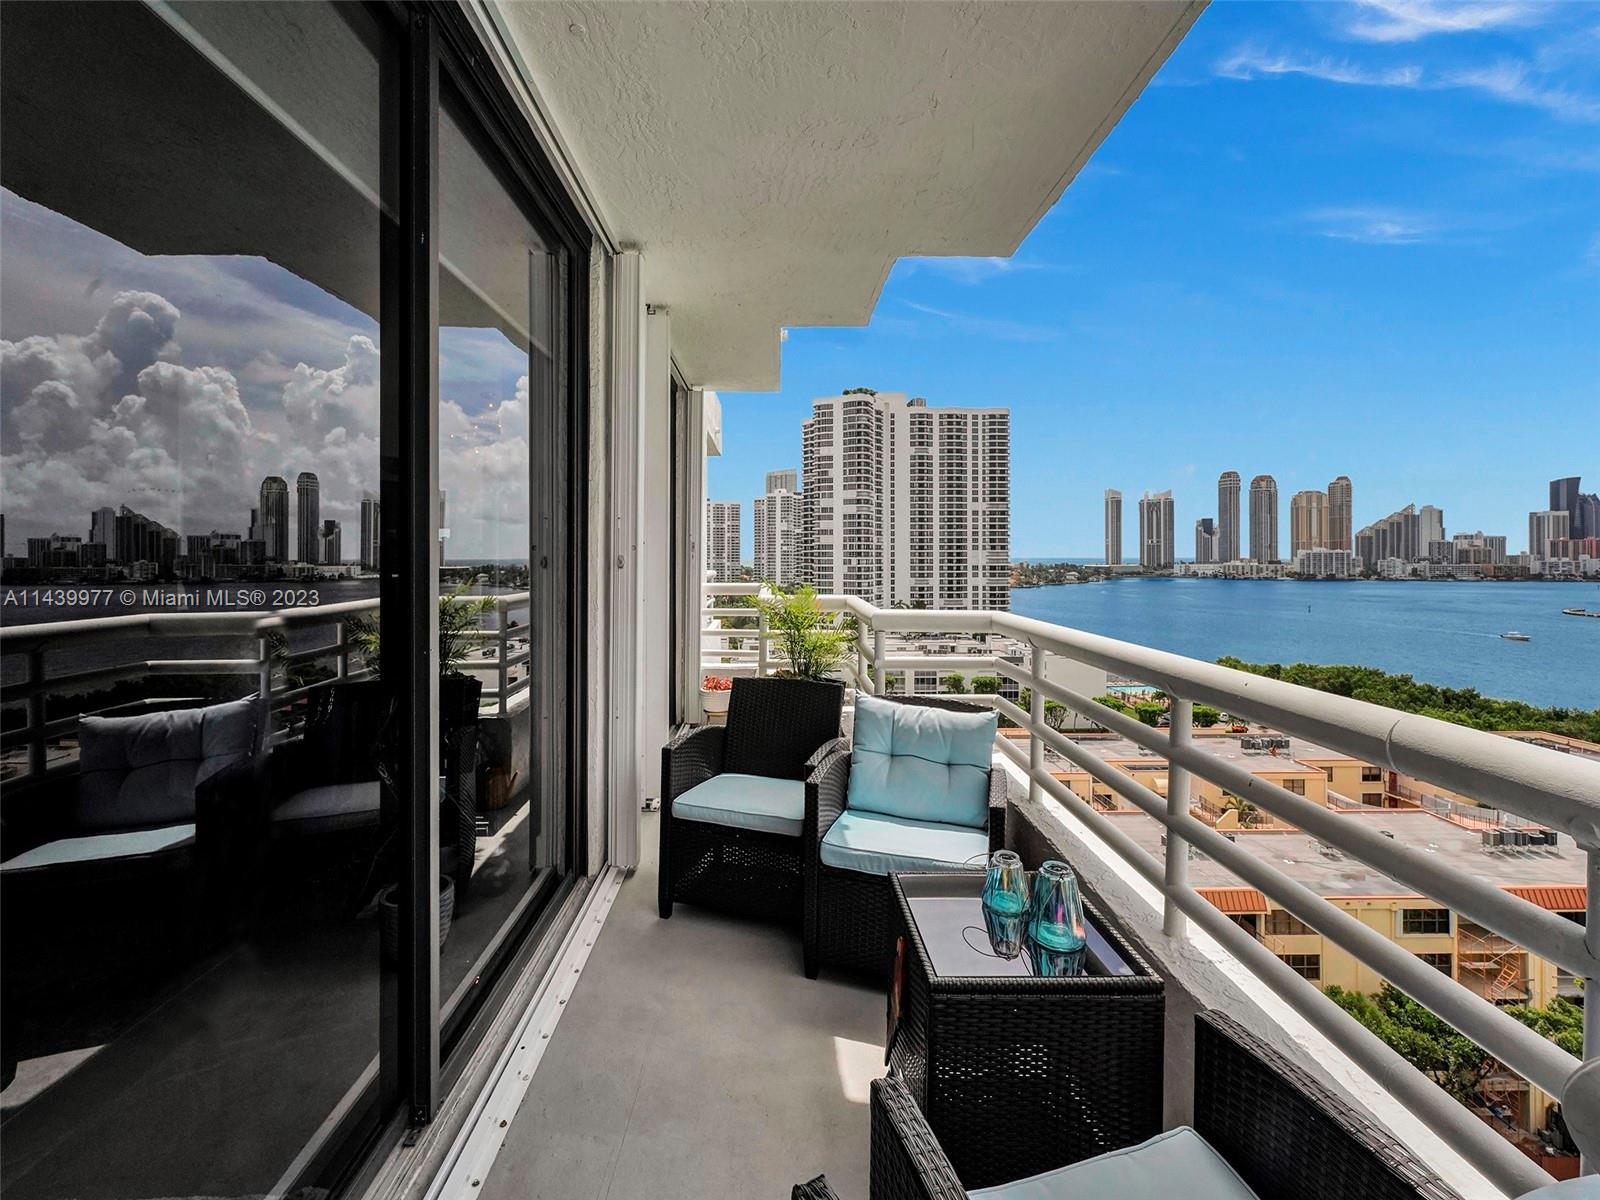 Photo 2 of Parc Central Aventura East Apt 1413 in Aventura - MLS A11439977